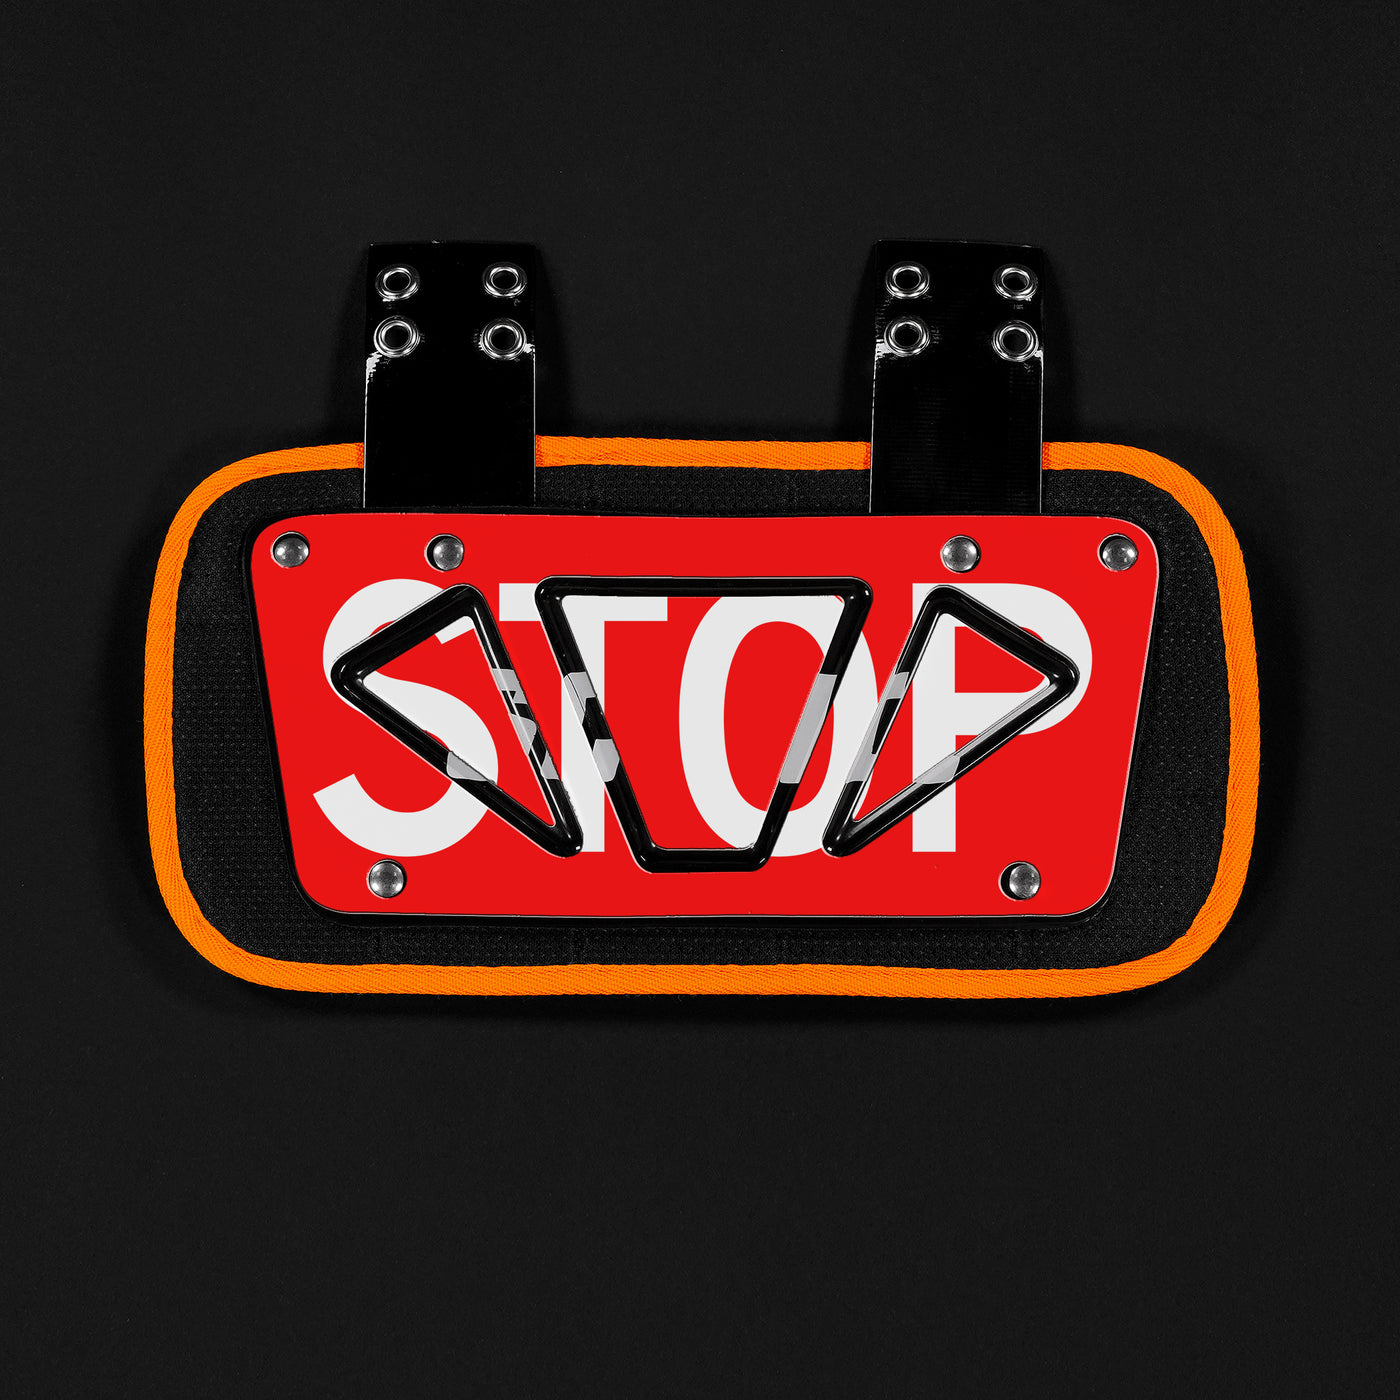 STOP Sticker for Back Plate